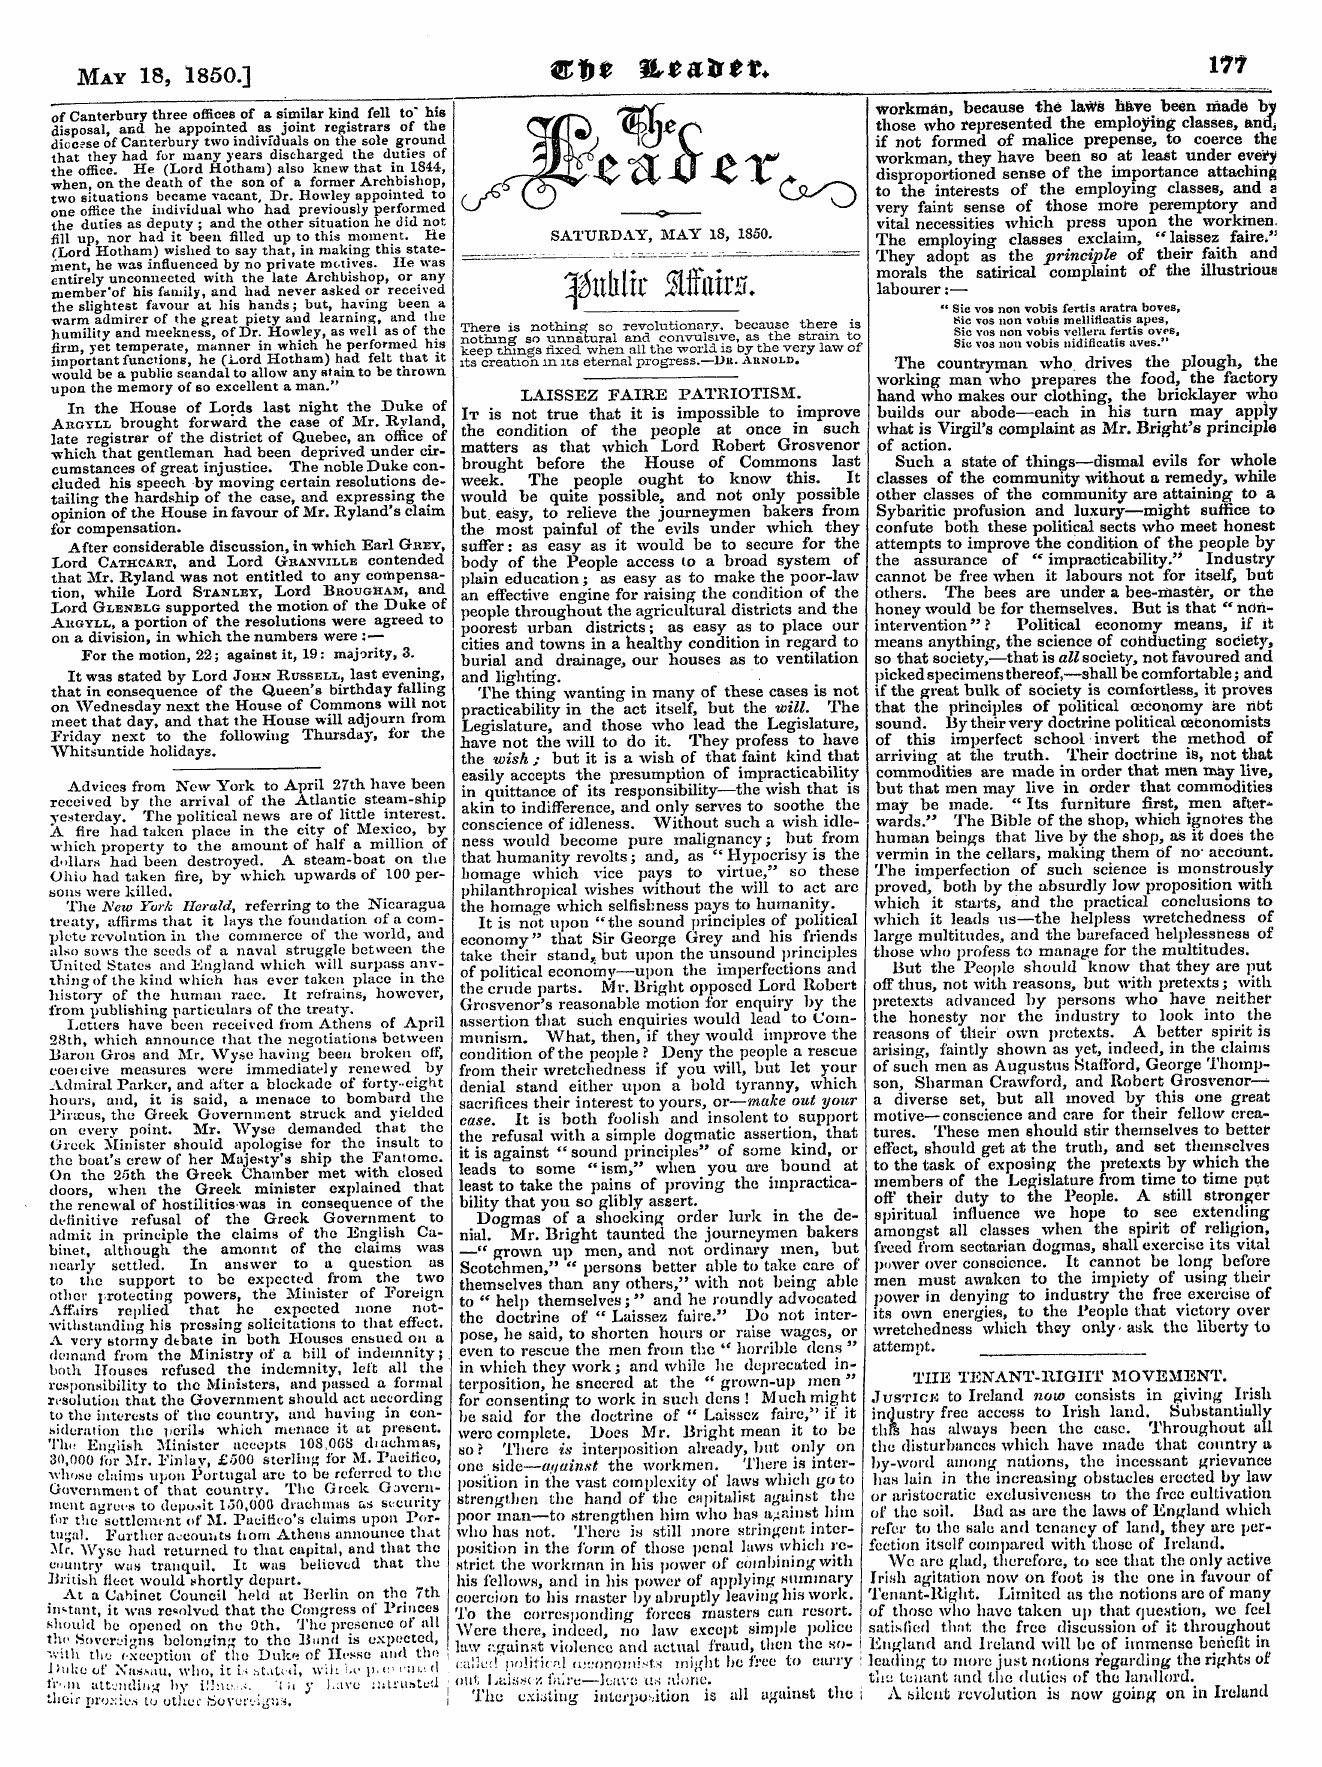 Leader (1850-1860): jS F Y, Country edition - Saturday, May 18, 1850.